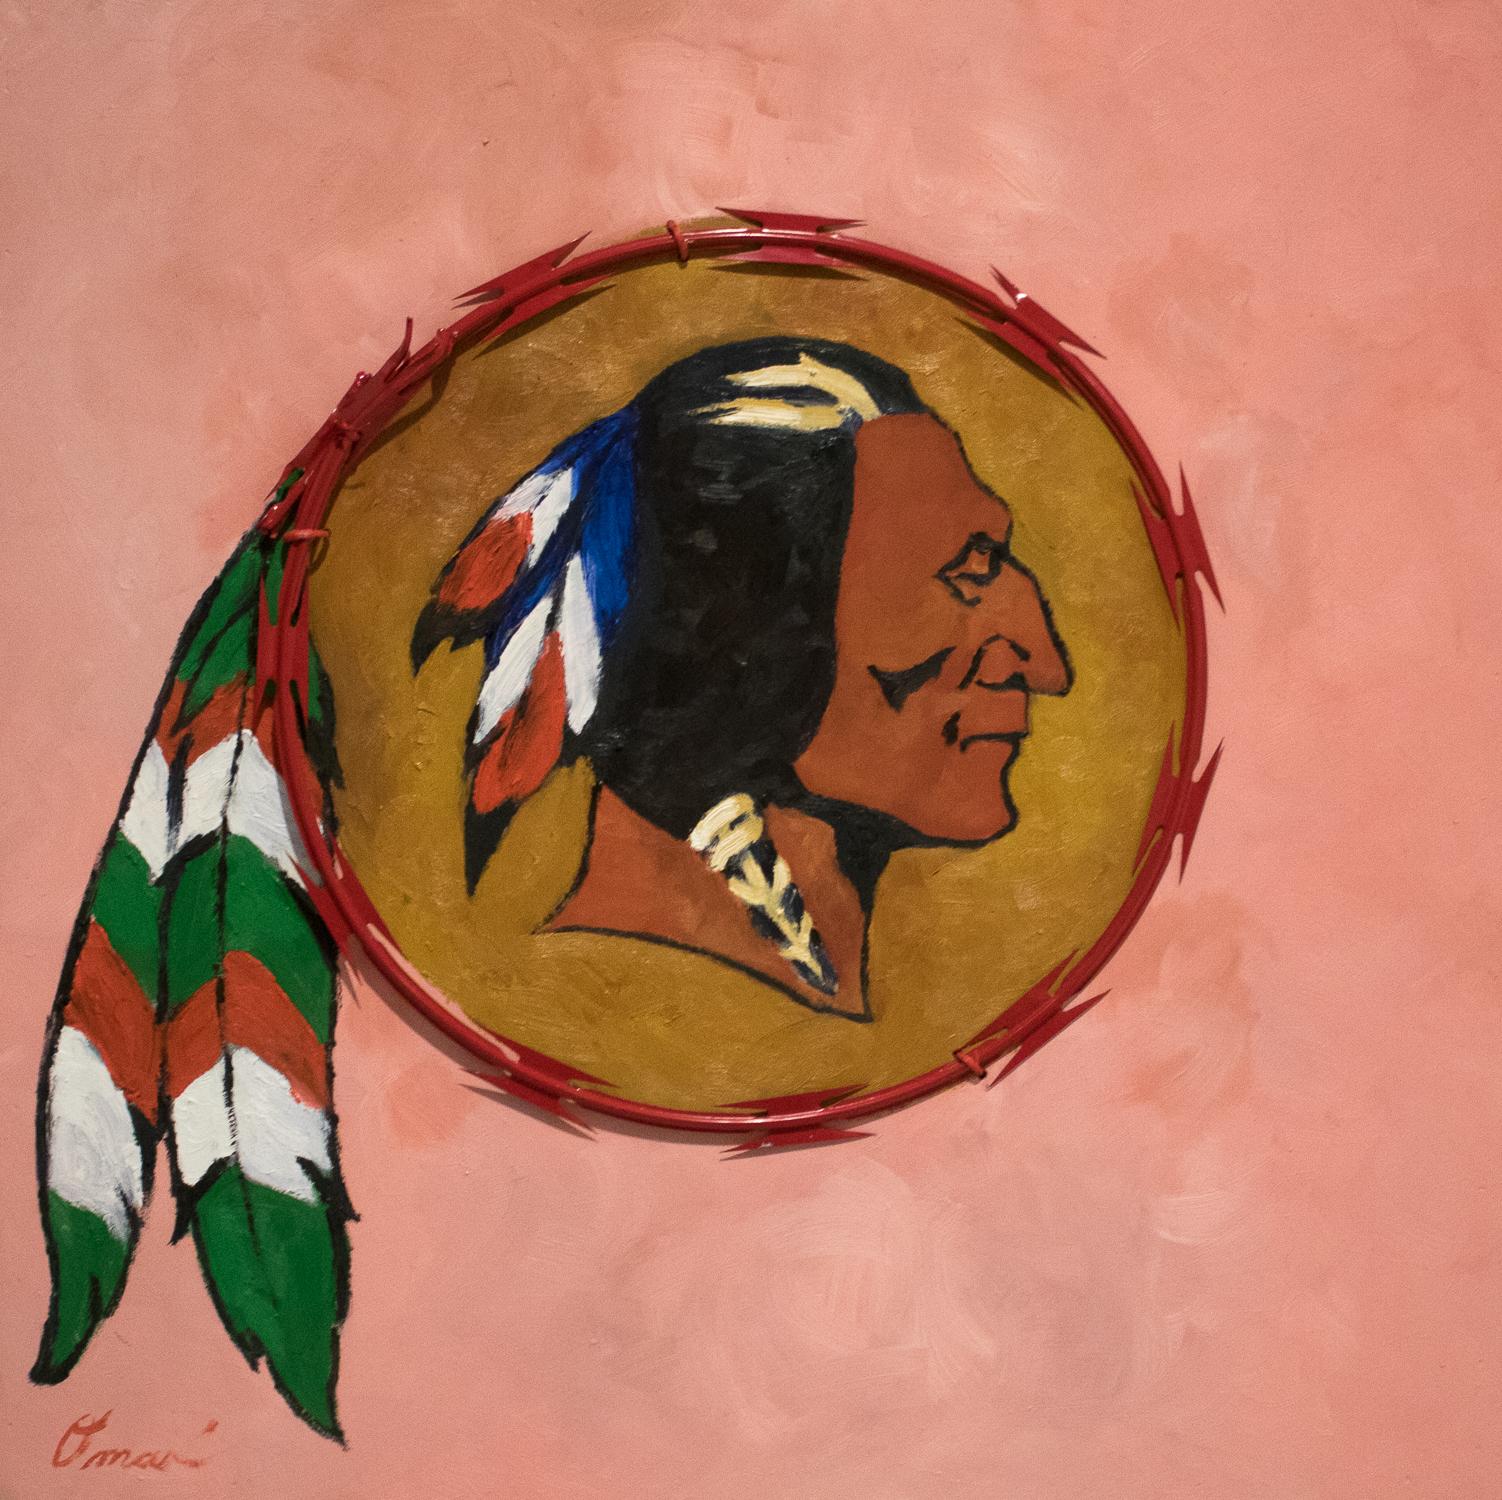 REDSKIN - contemporary political painting, pink, red razor wire, native chief